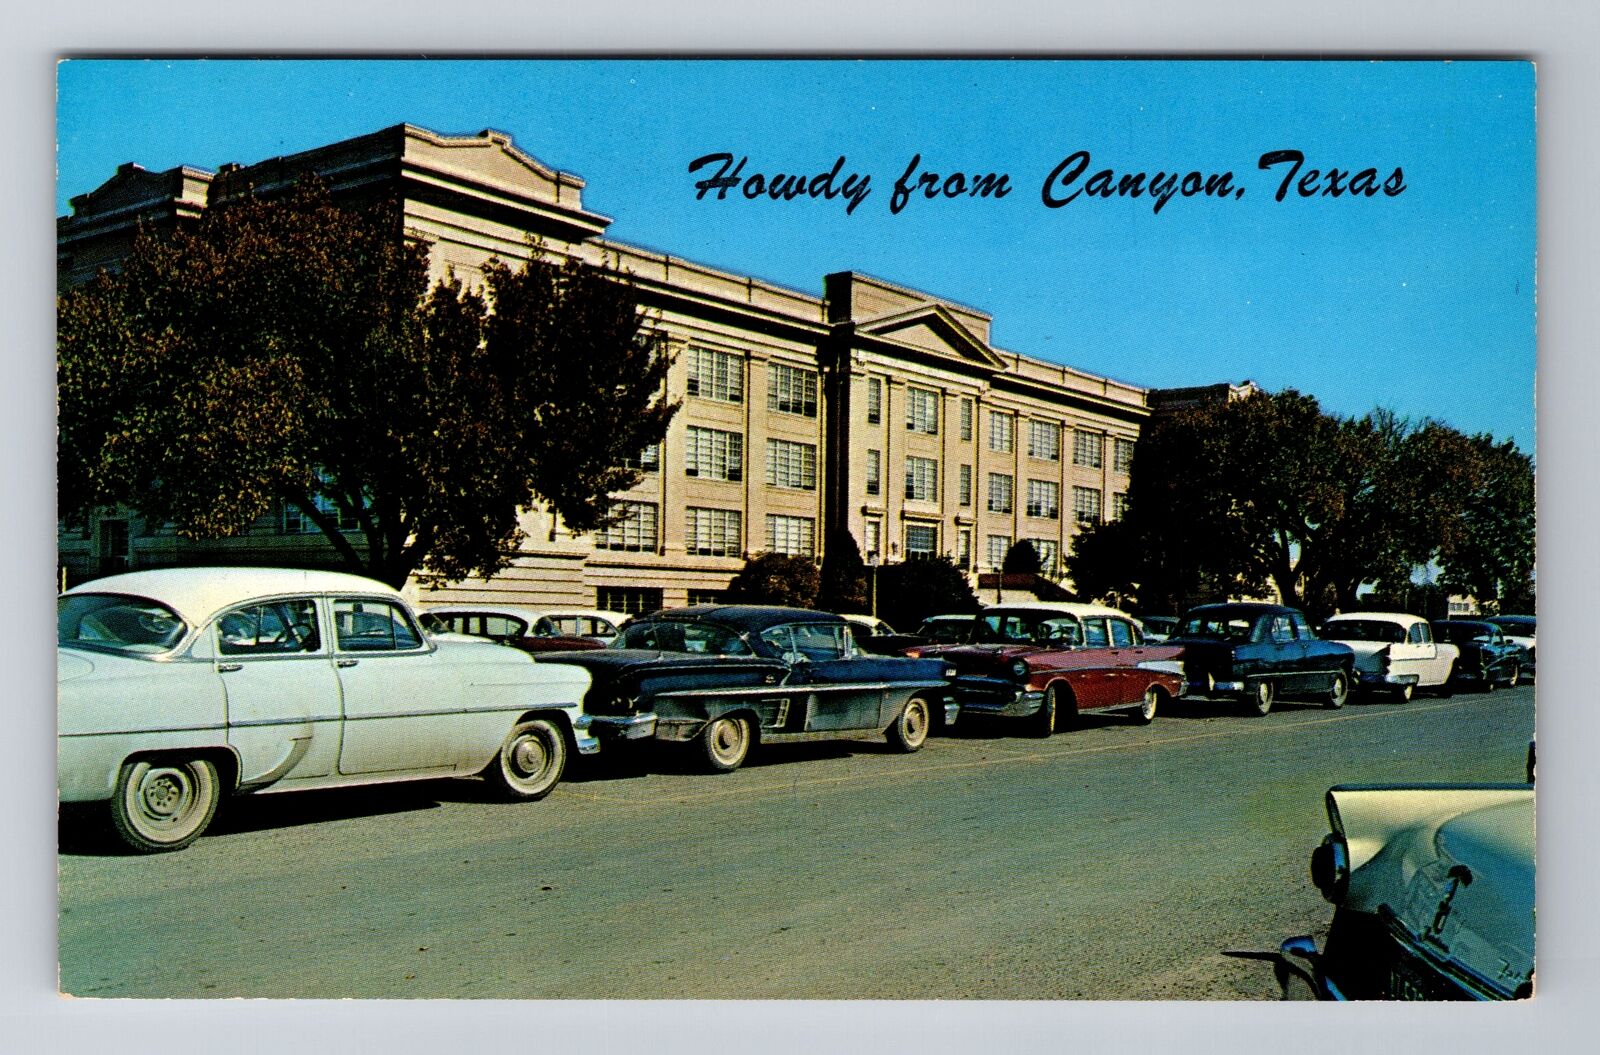 Canyon TX-Texas, Administration Building, West Texas College, Vintage Postcard